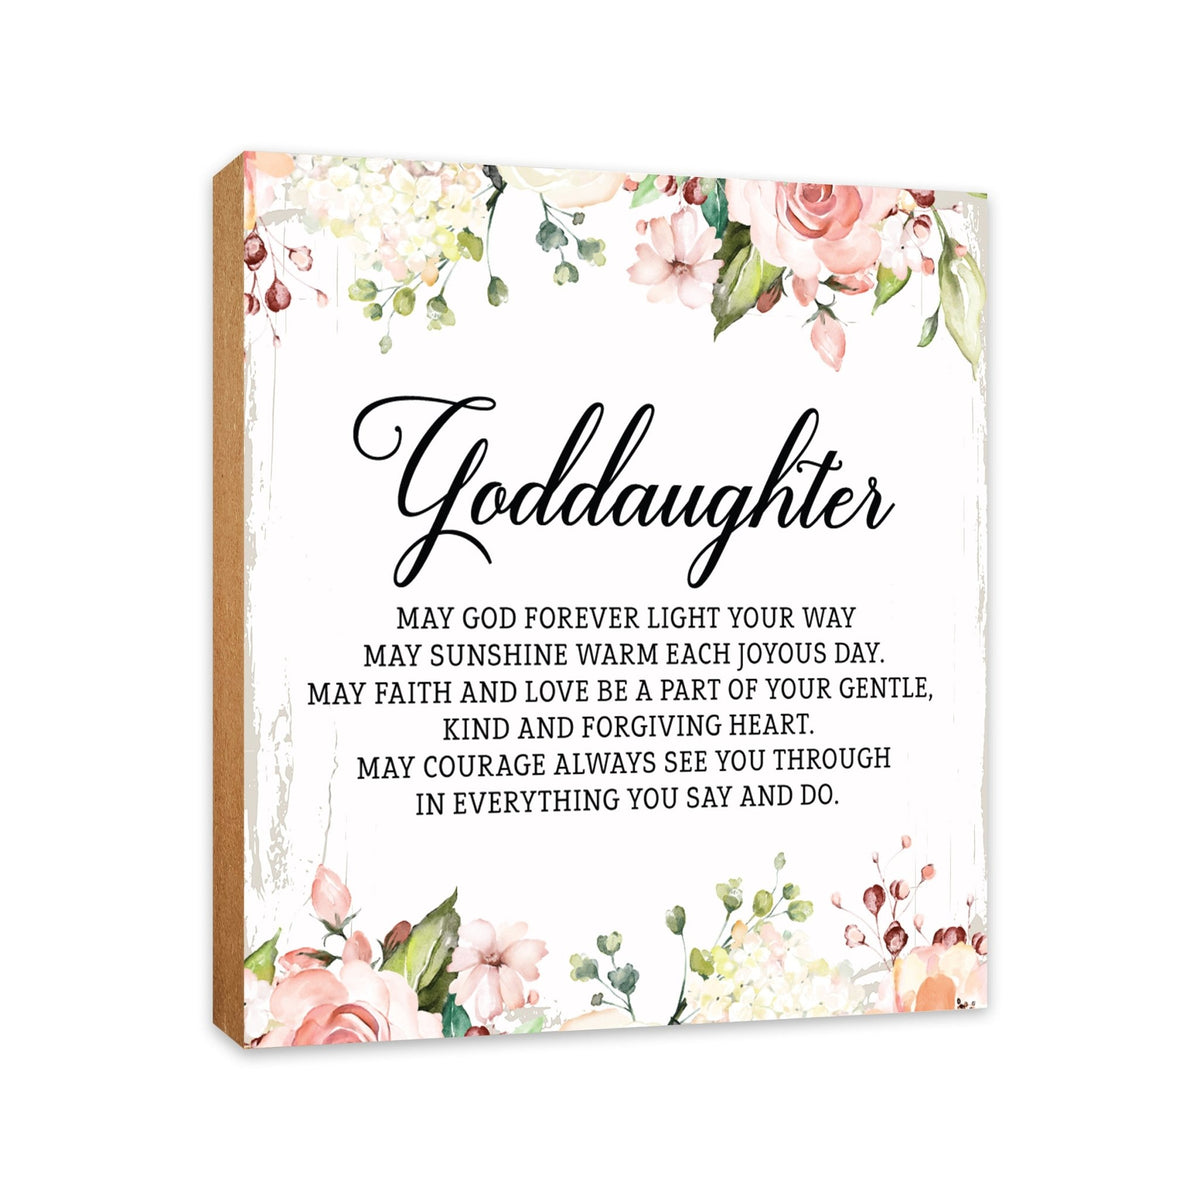 Goddaughter May God Forever Floral 6x6 Inches Wood Family Art Sign Tabletop and Shelving For Home Décor - LifeSong Milestones